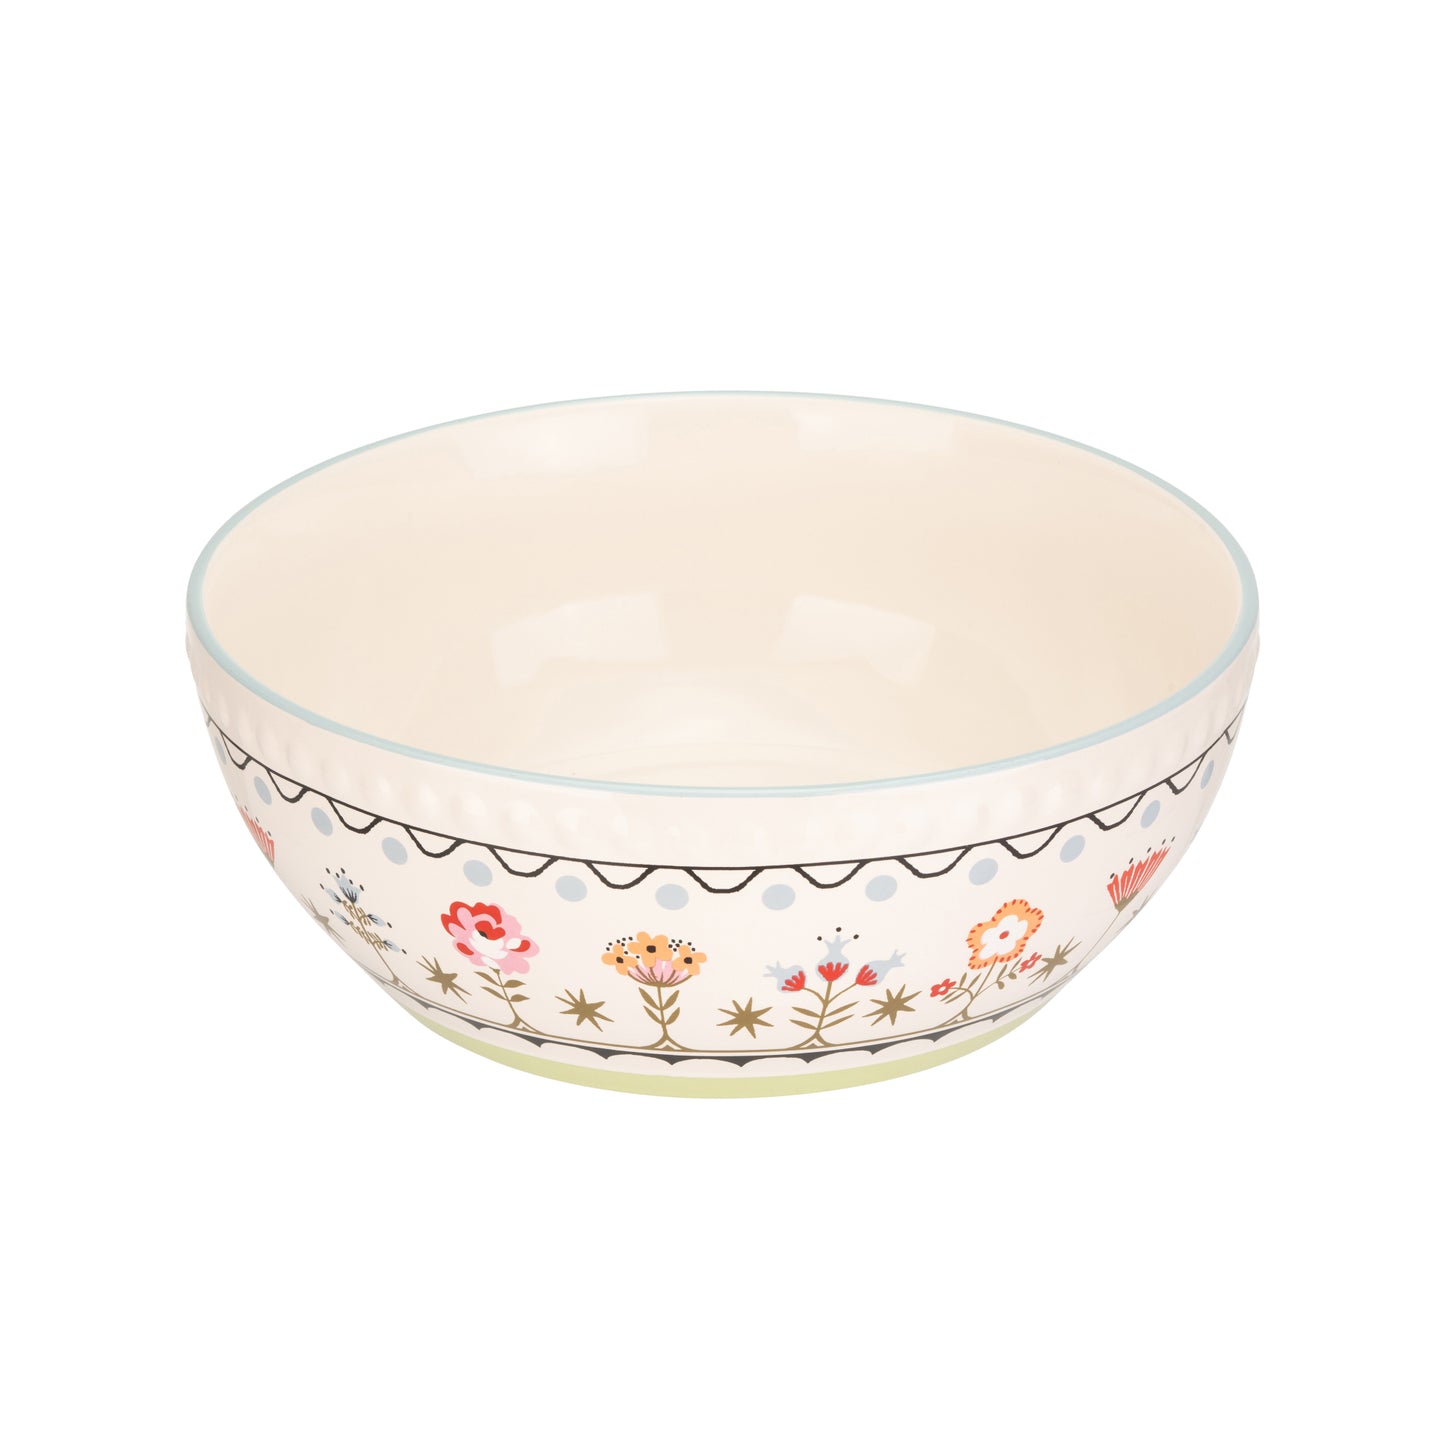 Cath Kidston Painted Table Ceramic Large Serving Bowl